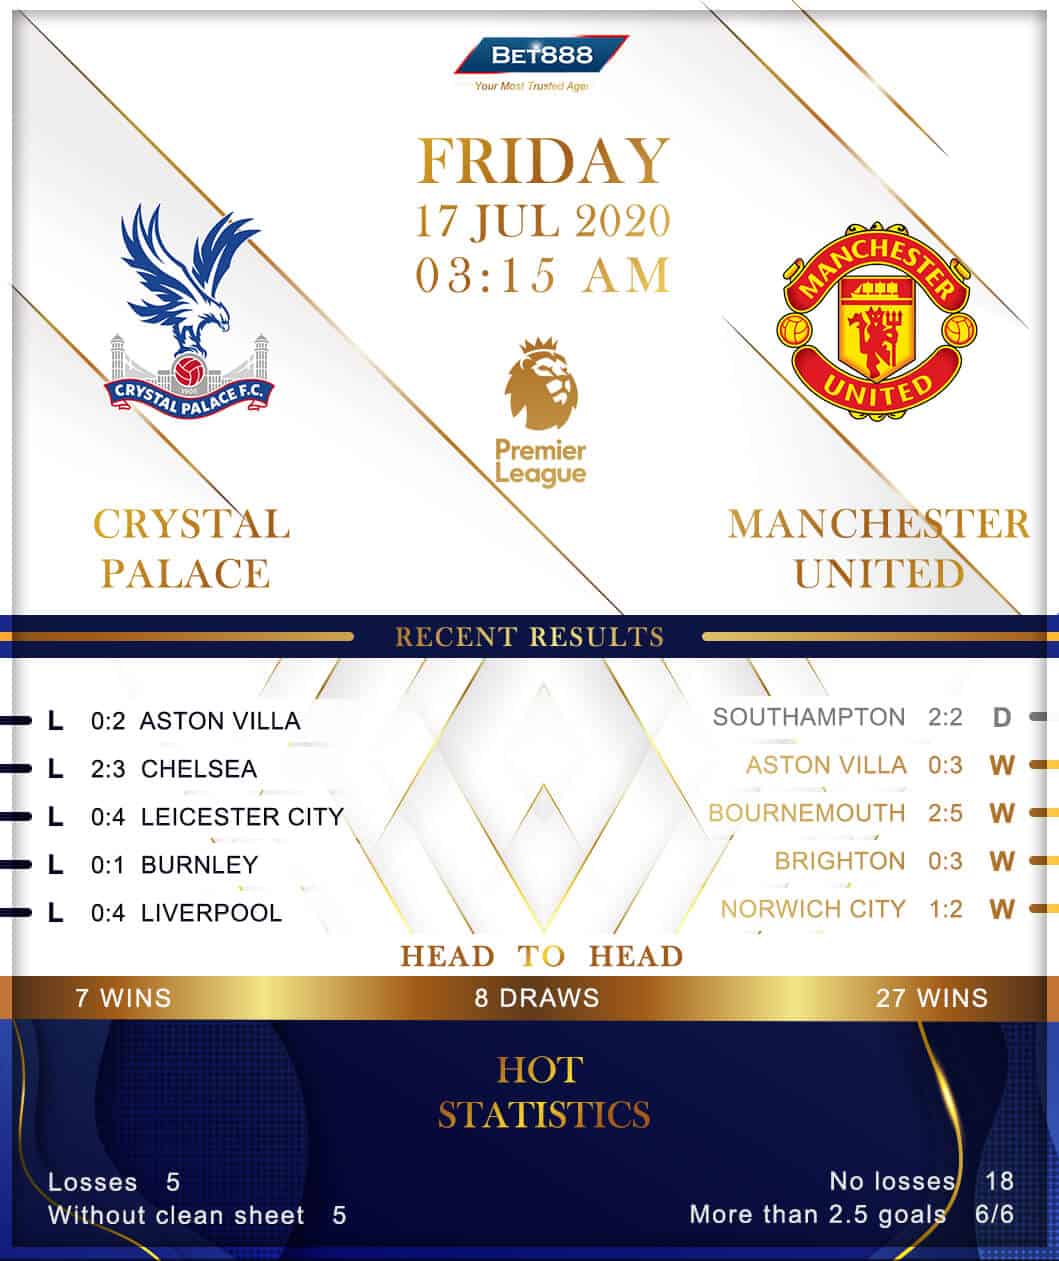 Crystal Palace vs Manchester United 17/07/20